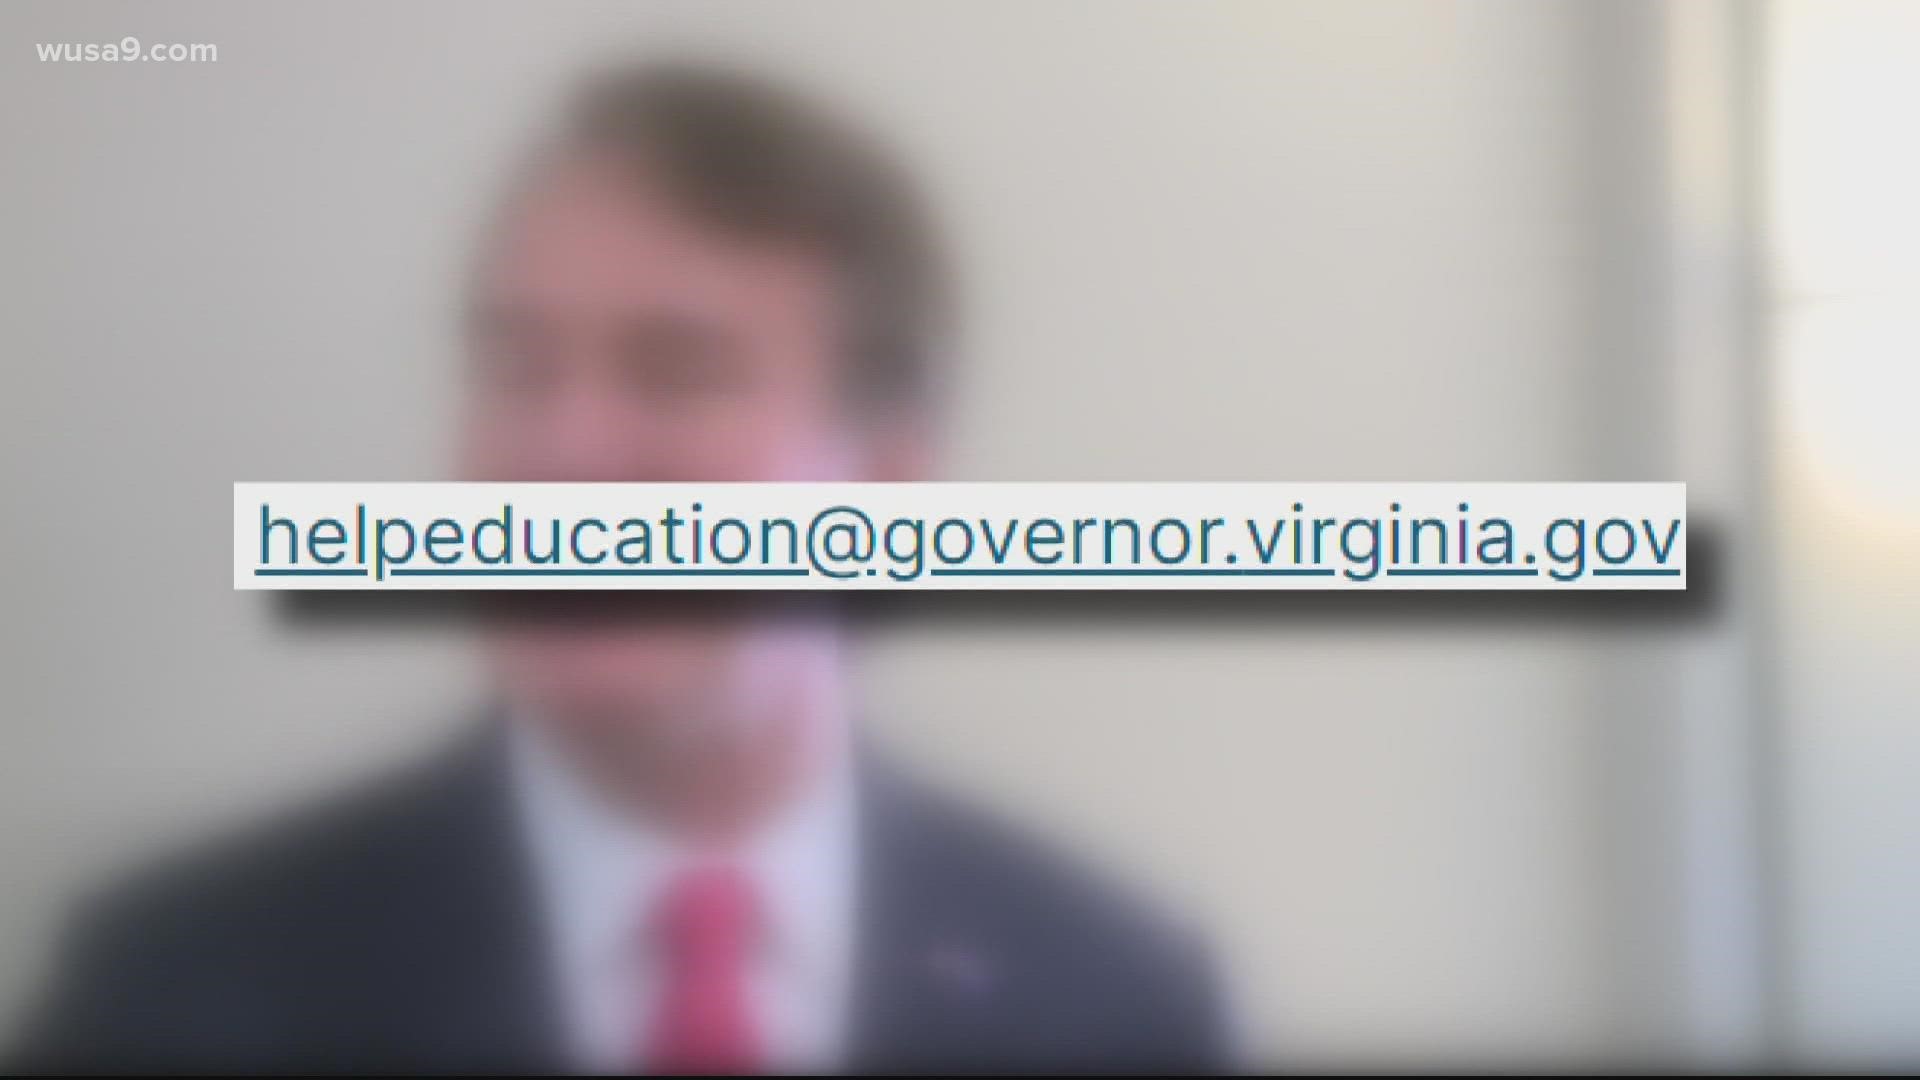 Youngkin says he wants parents to send his office “reports and observations” about “divisive practices” within Virginian schools.